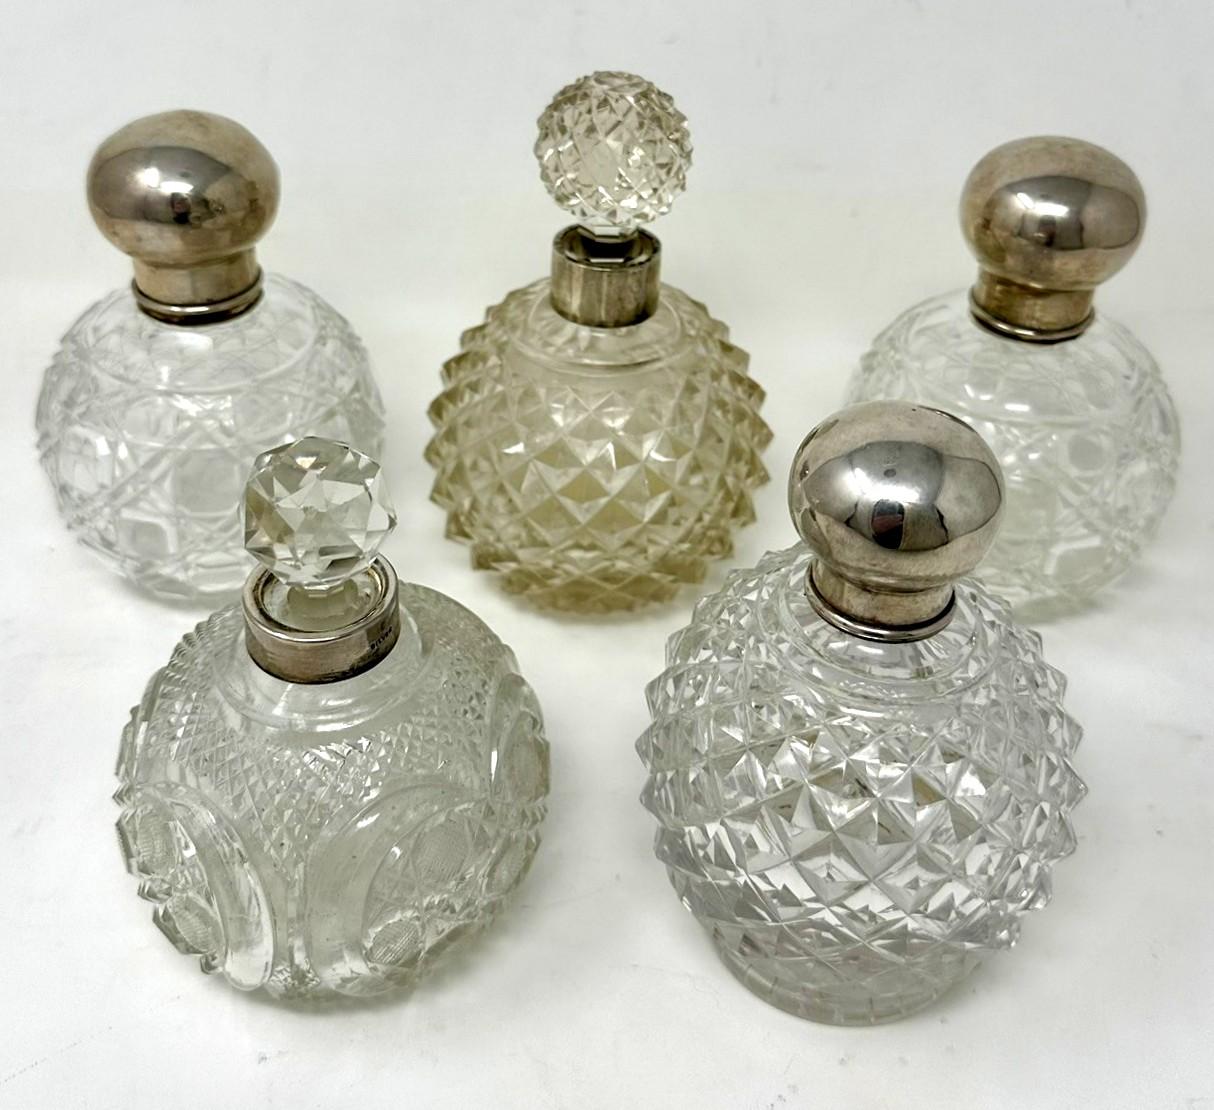 Hand-Carved Set Antique English Crystal Sterling Victorian Silver Scent Perfume Bottles 1891